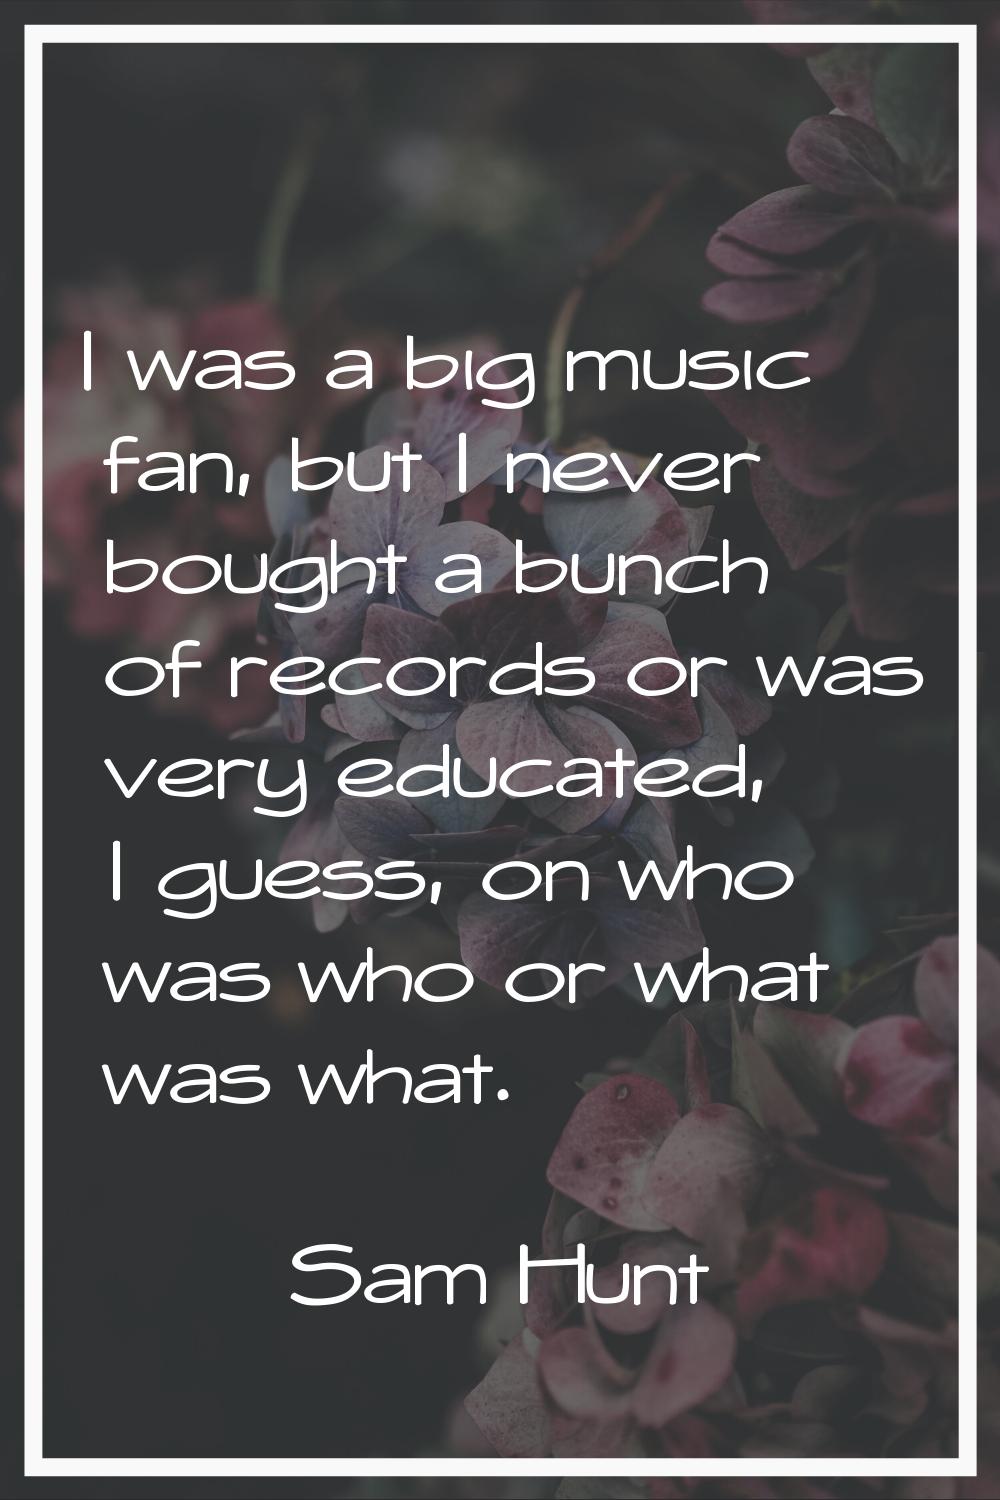 I was a big music fan, but I never bought a bunch of records or was very educated, I guess, on who 